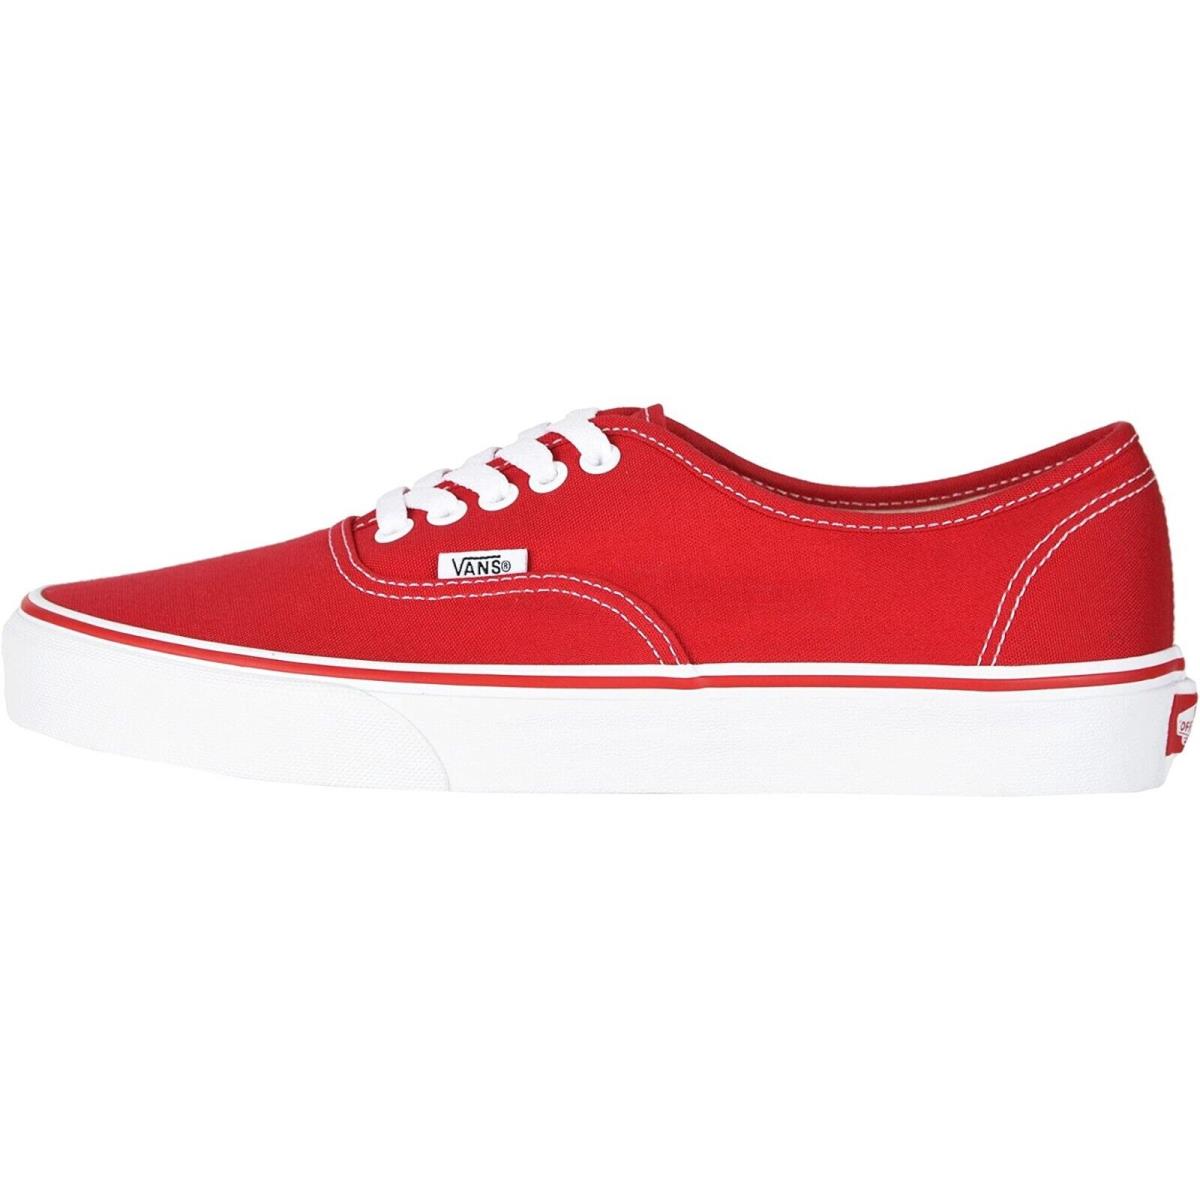 Vans Unisex Mens Womens Canvas Sneakers Skate Shoes Red/True White